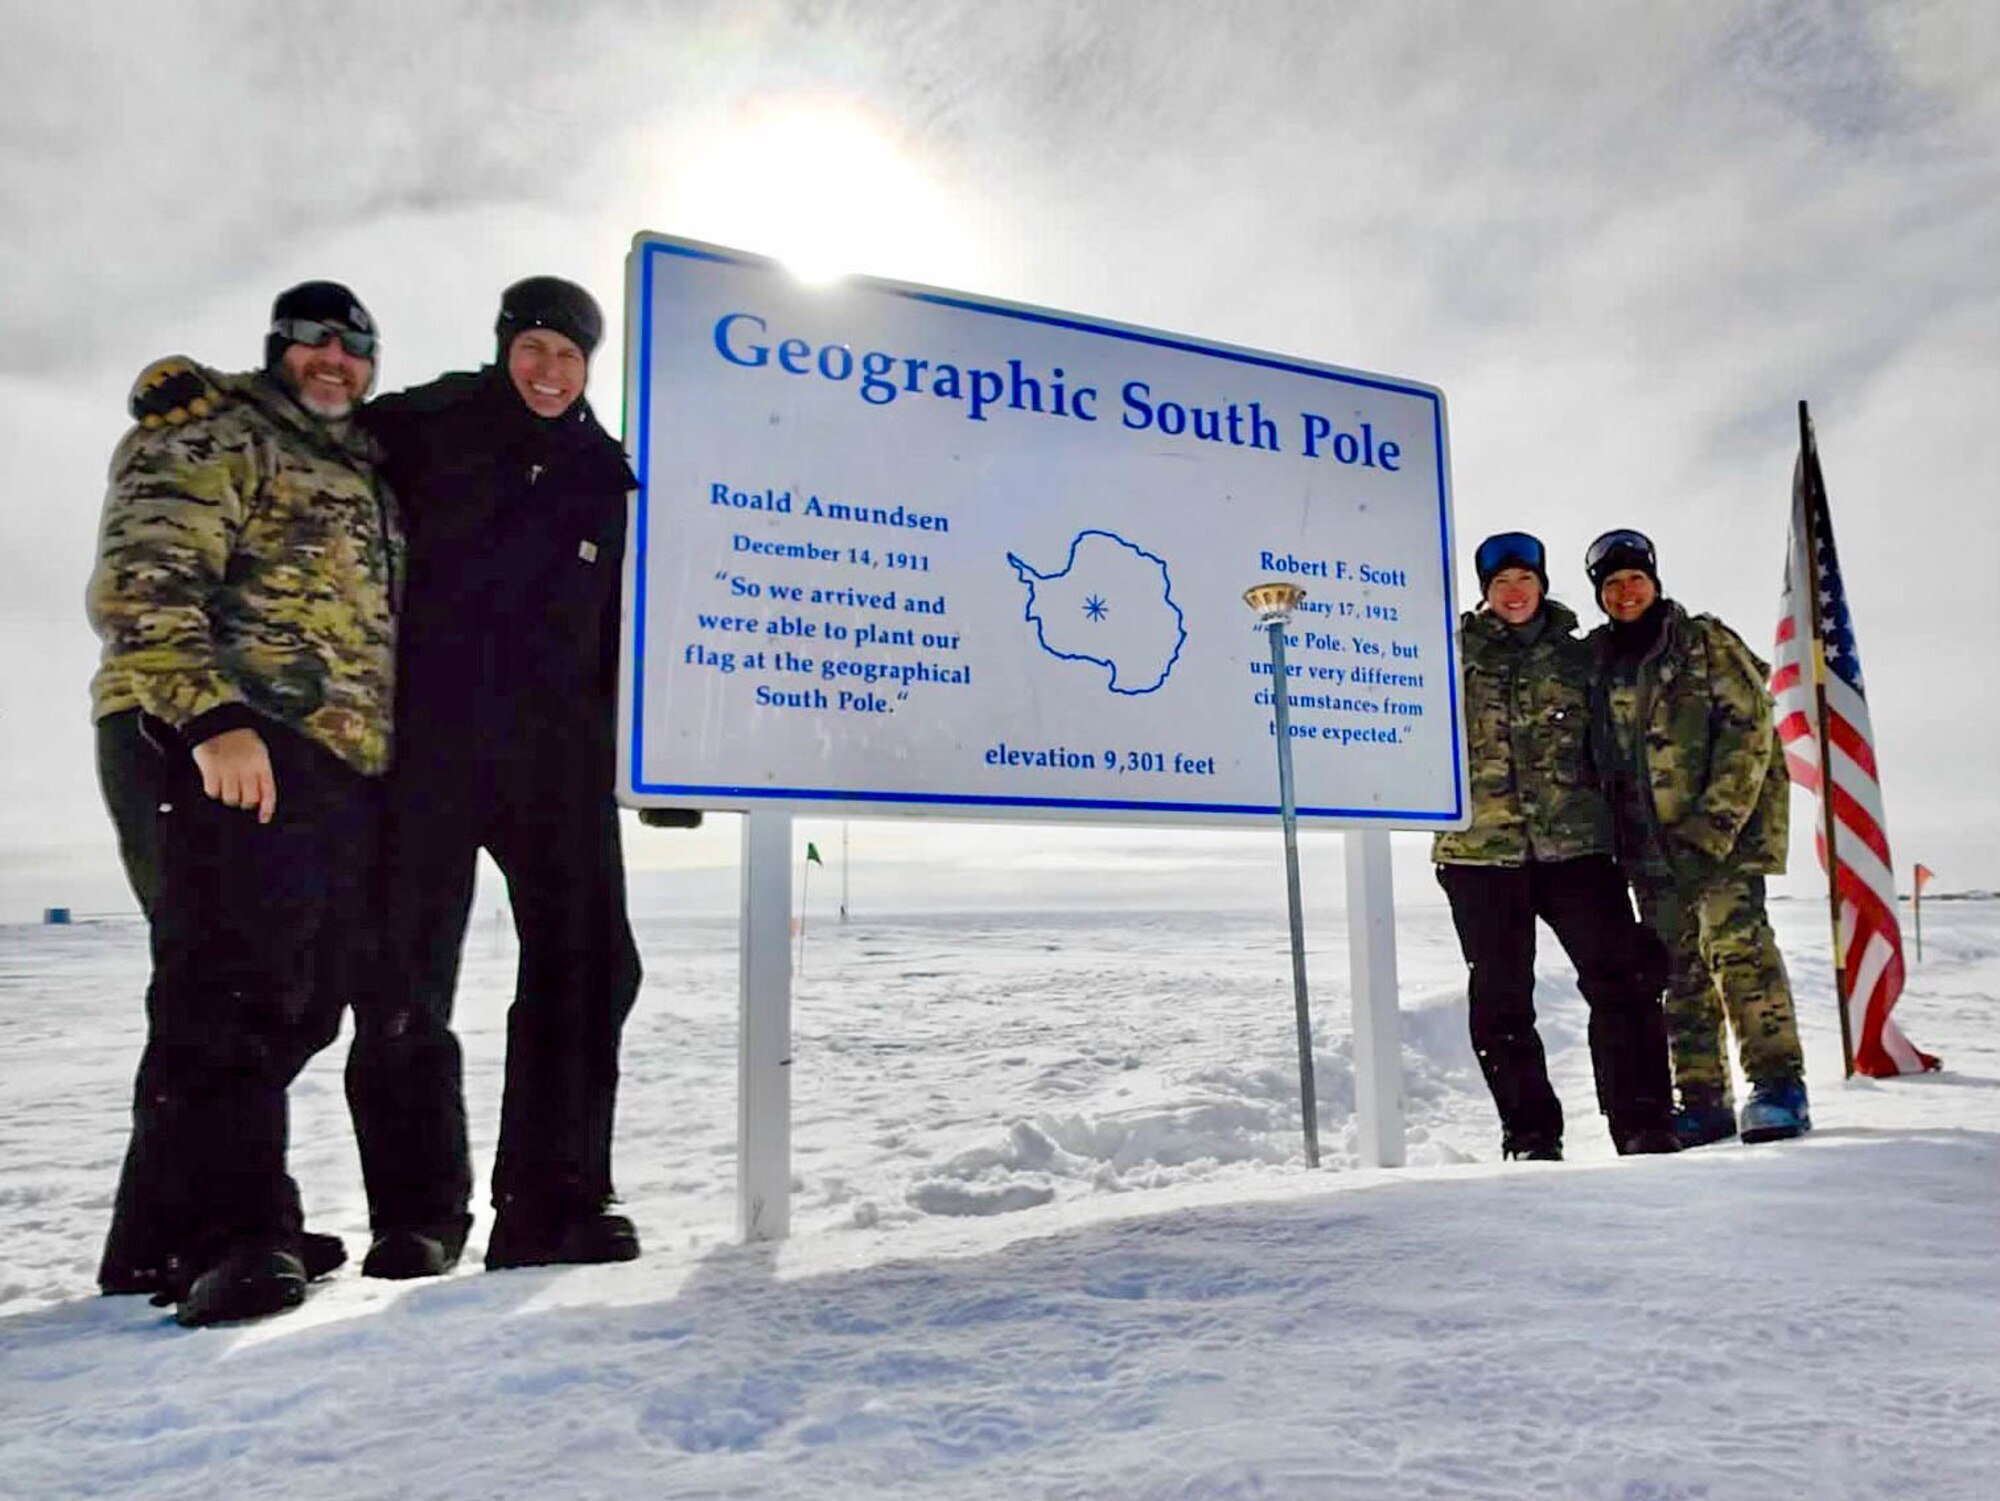 The South Pole retrograde cargo team, from left, Staff Sgt. Mark Ebensperger, Tech. Sgt. Brandon Wiggand, Tech. Sgt. Shannan O’Connor, and Staff Sgt. Jessica Cruz, at the geographic South Pole in Antarctica, Nov. 30, 2022. The team deployed to Antarctica for five weeks to help remove excess cargo from the South Pole.